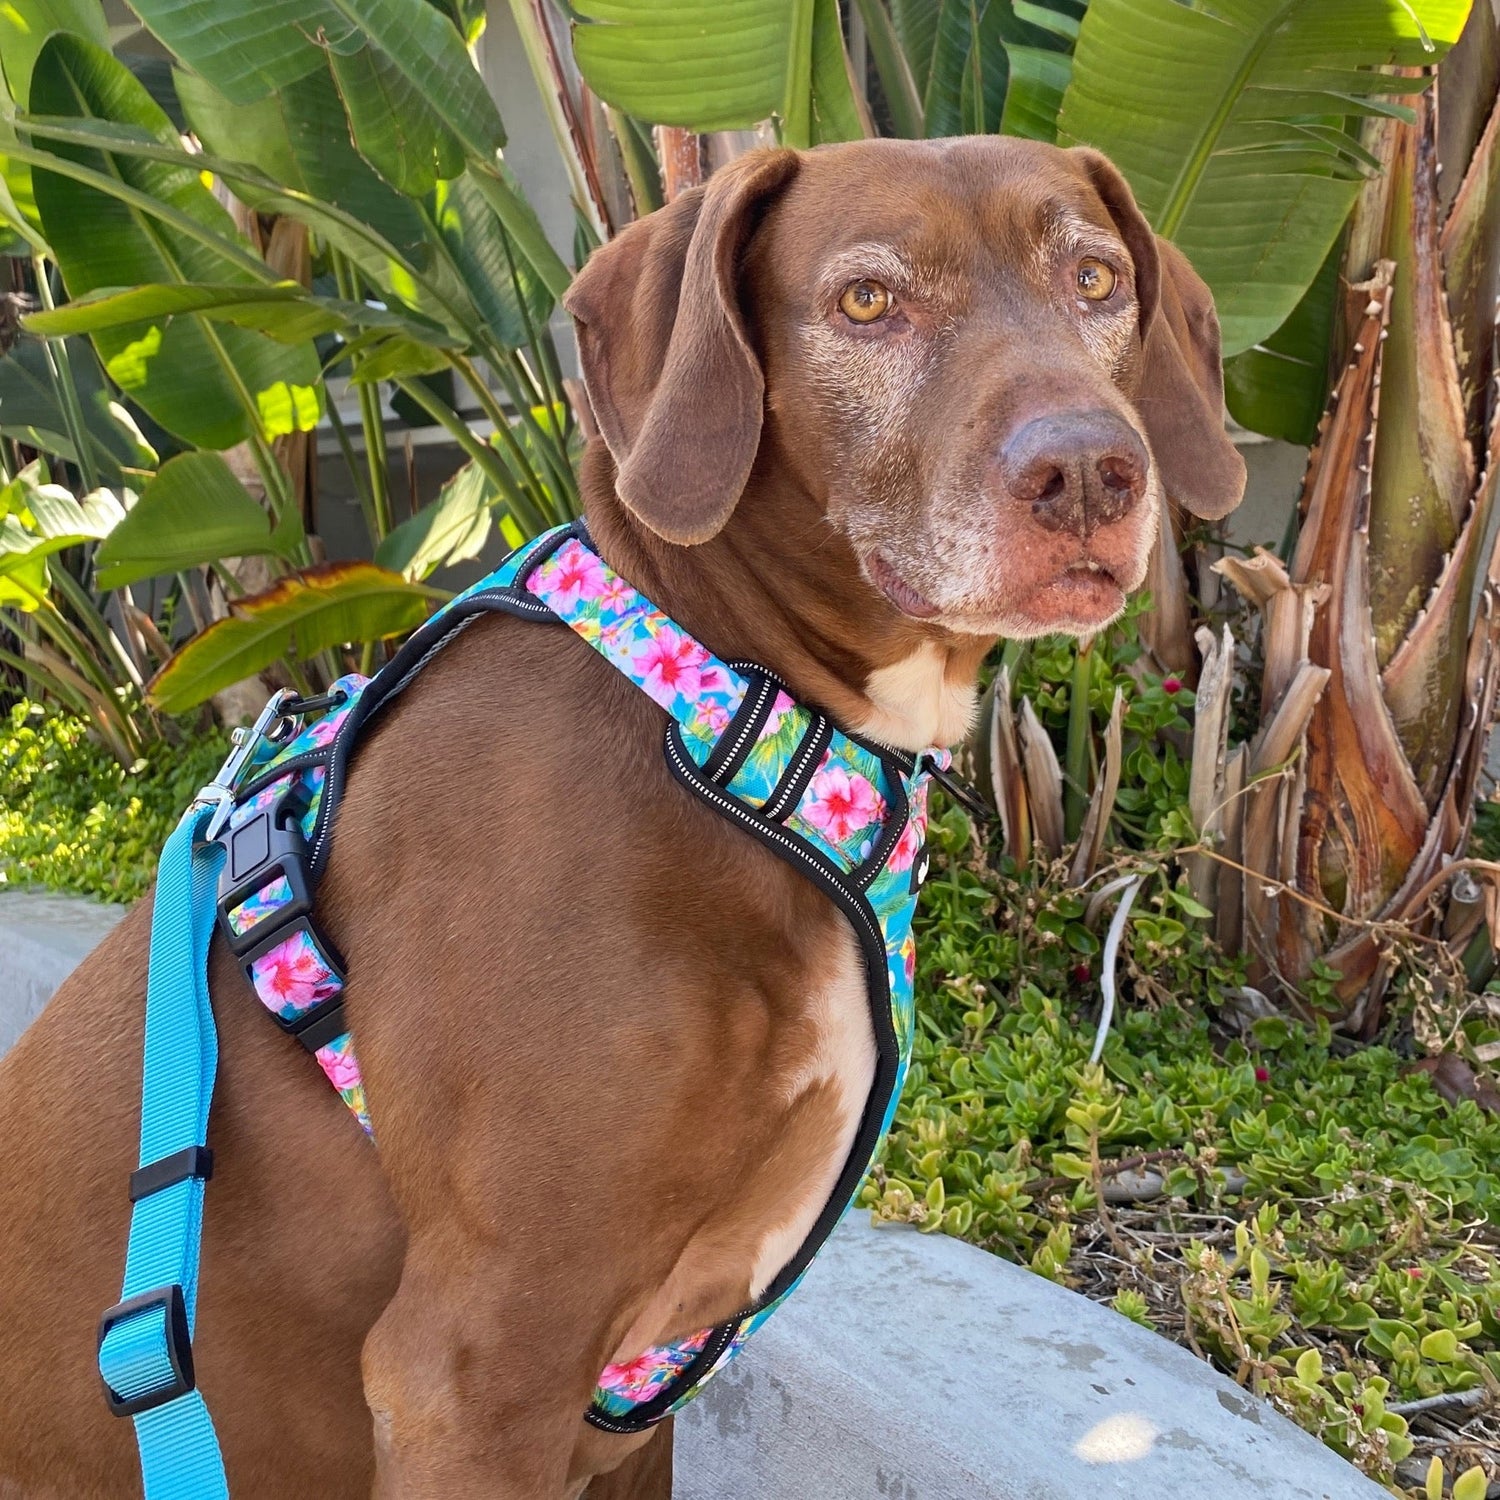 a side view photo of a brown Labrador mix dog wearing a floral adjustable dog harness and teal blue leash